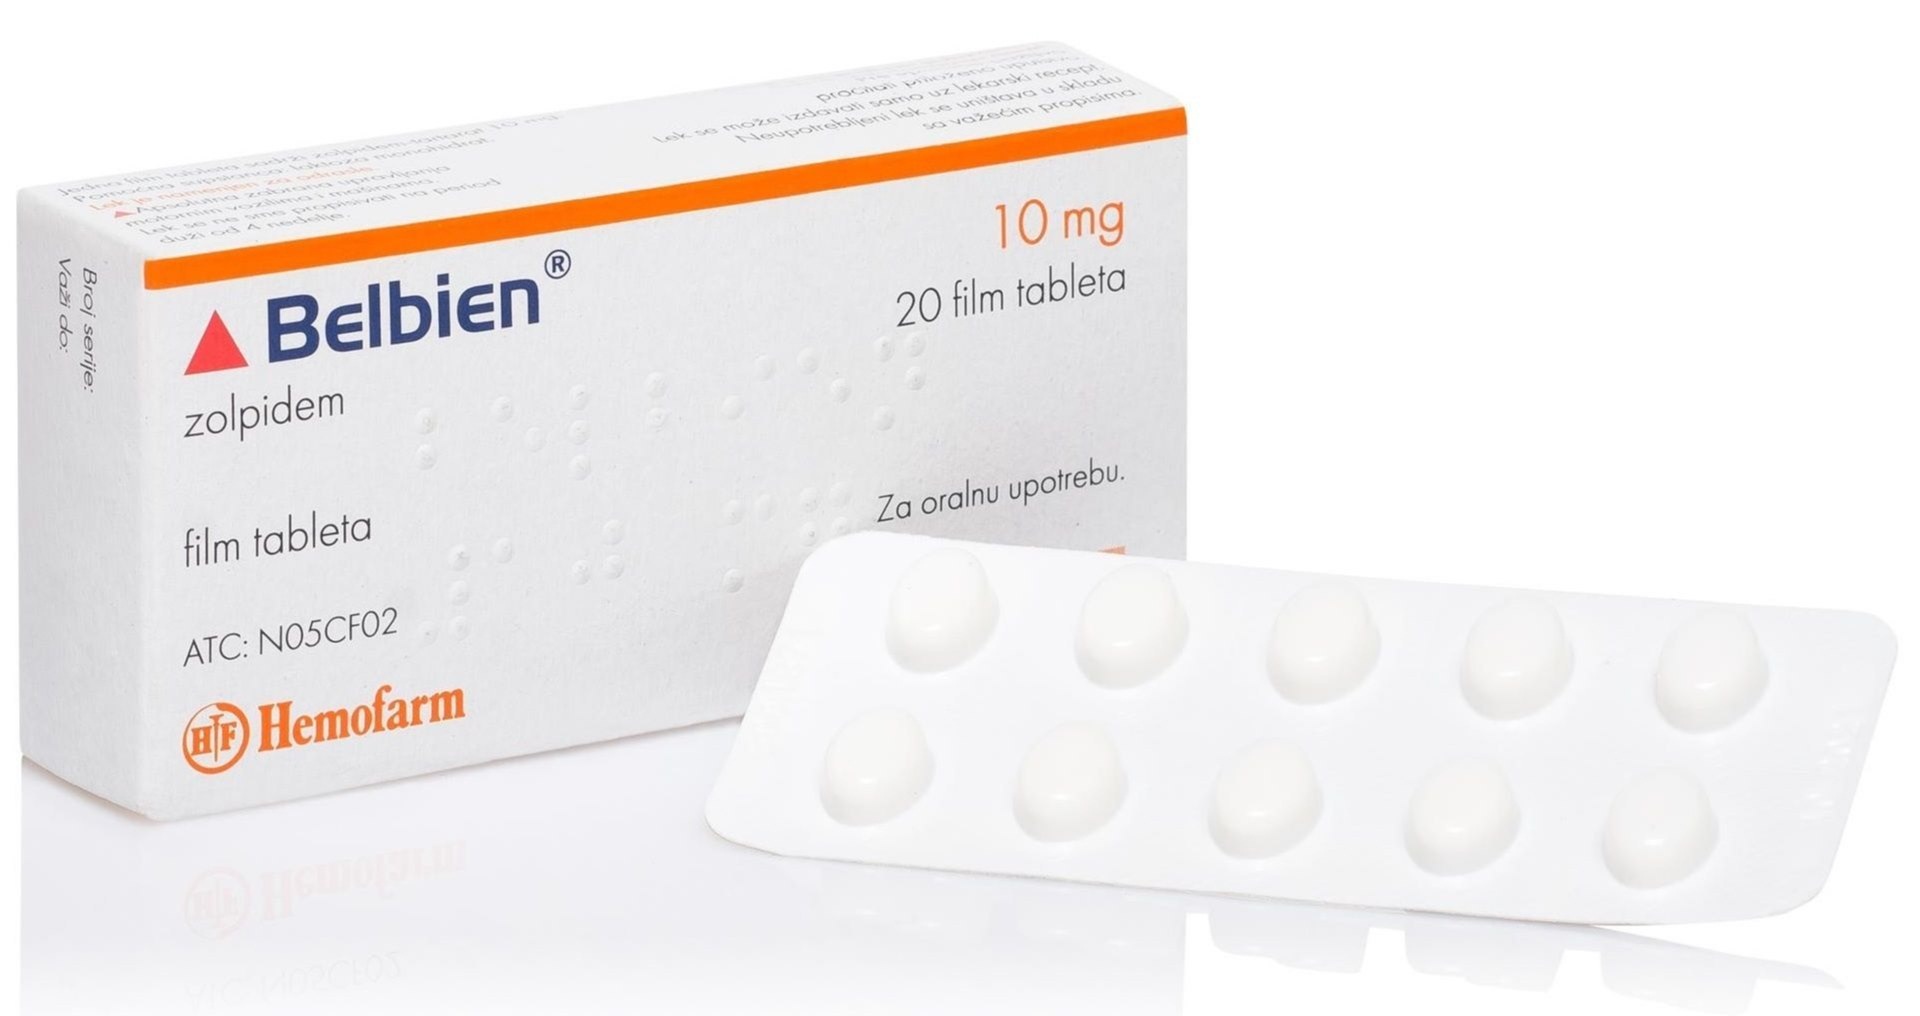 How to use Zolpidem 10mg? / Zolpidem 10mg for sleep faster